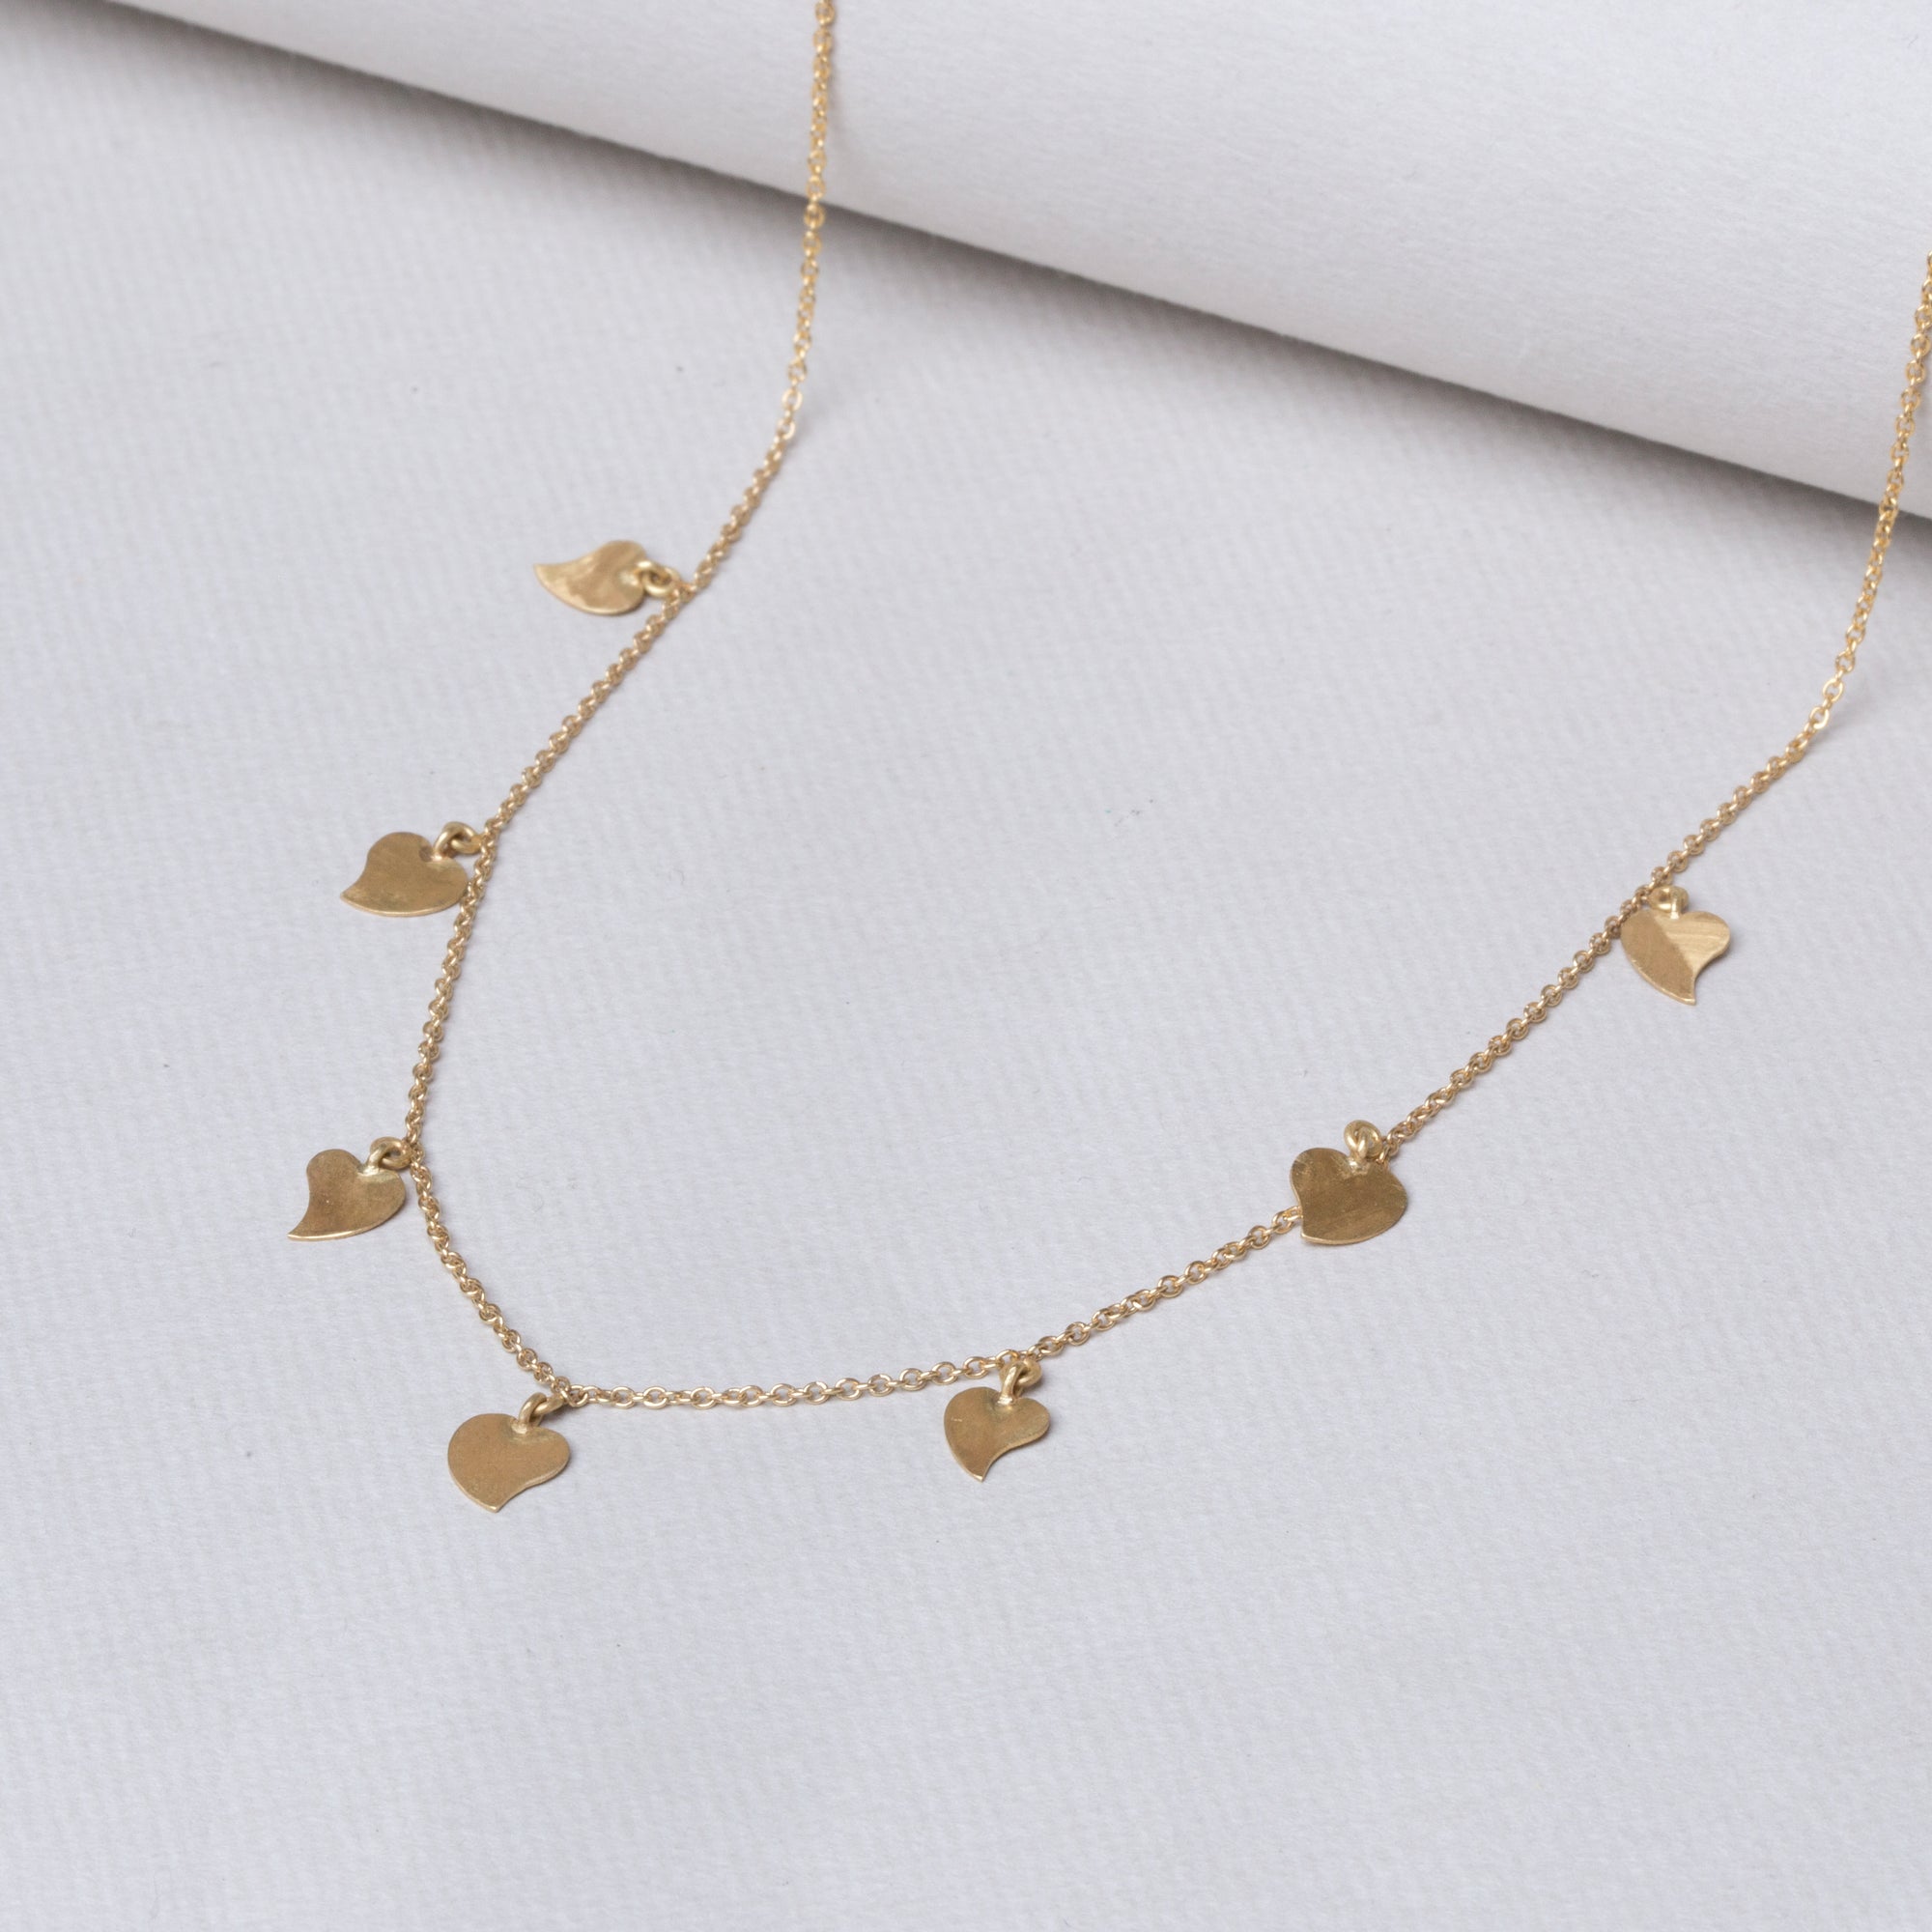 Gold Garland Necklace with Hearts